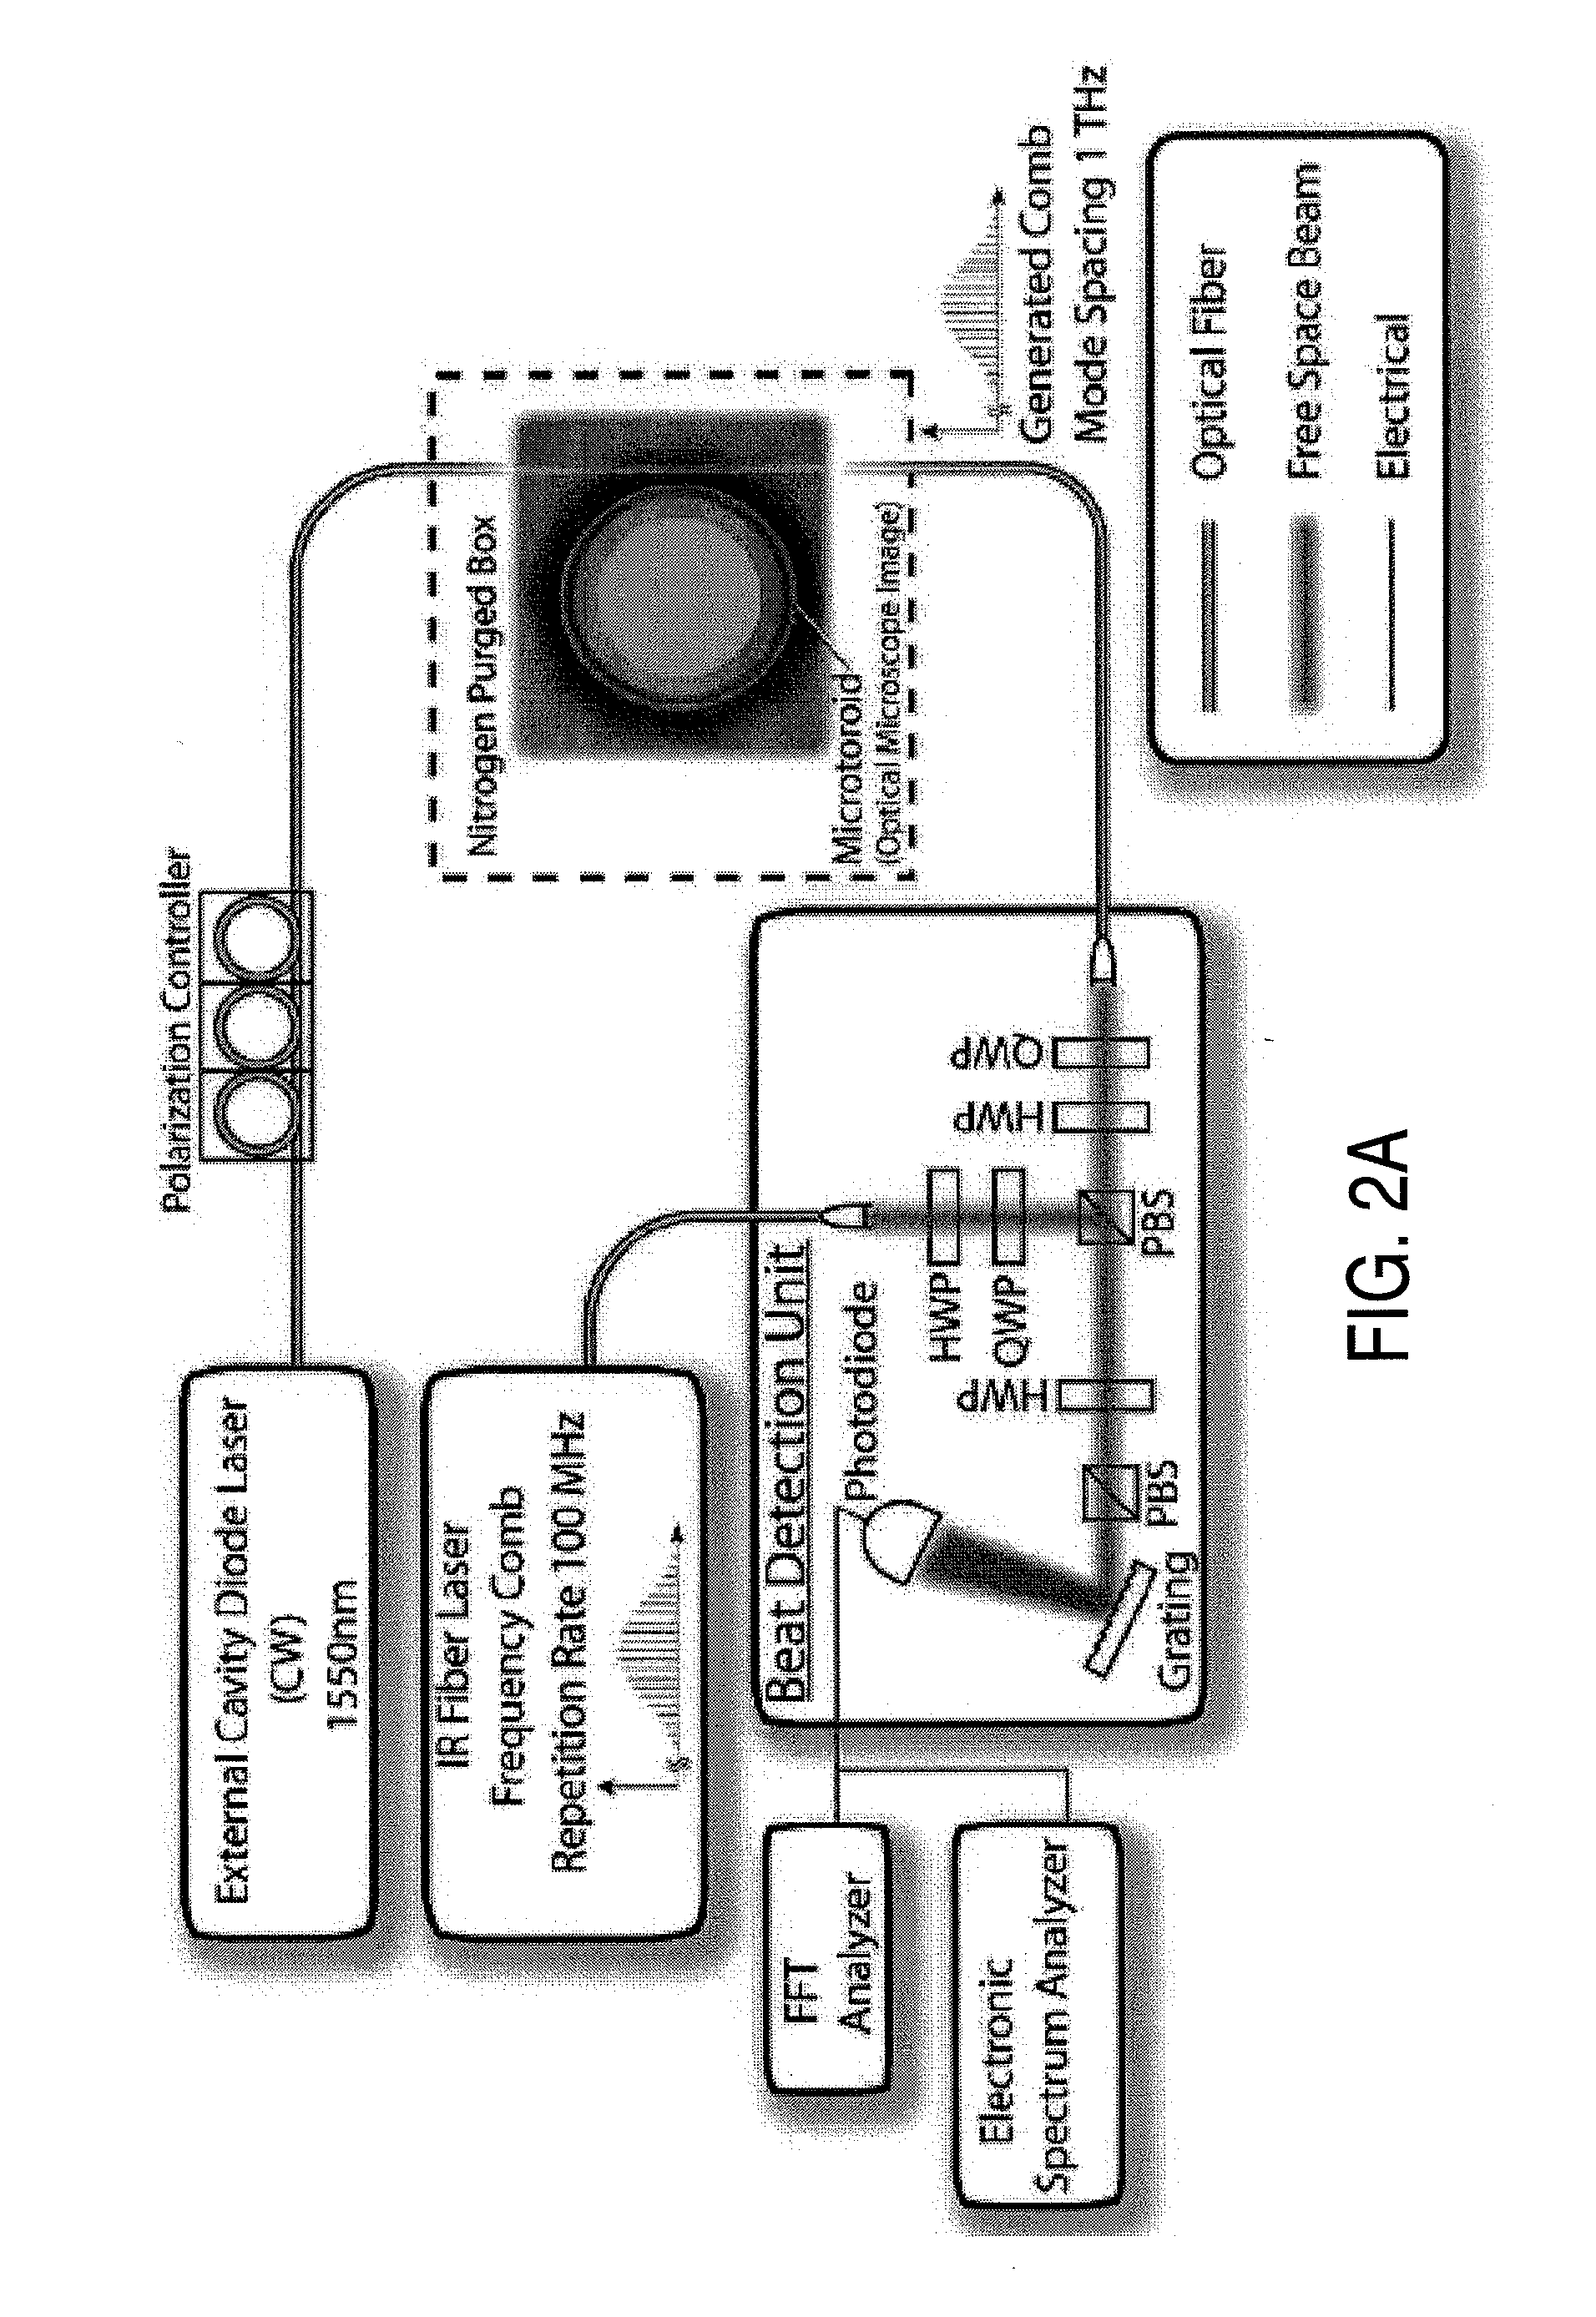 Method and apparatus for optical frequency comb generation using a monolithic micro-resonator